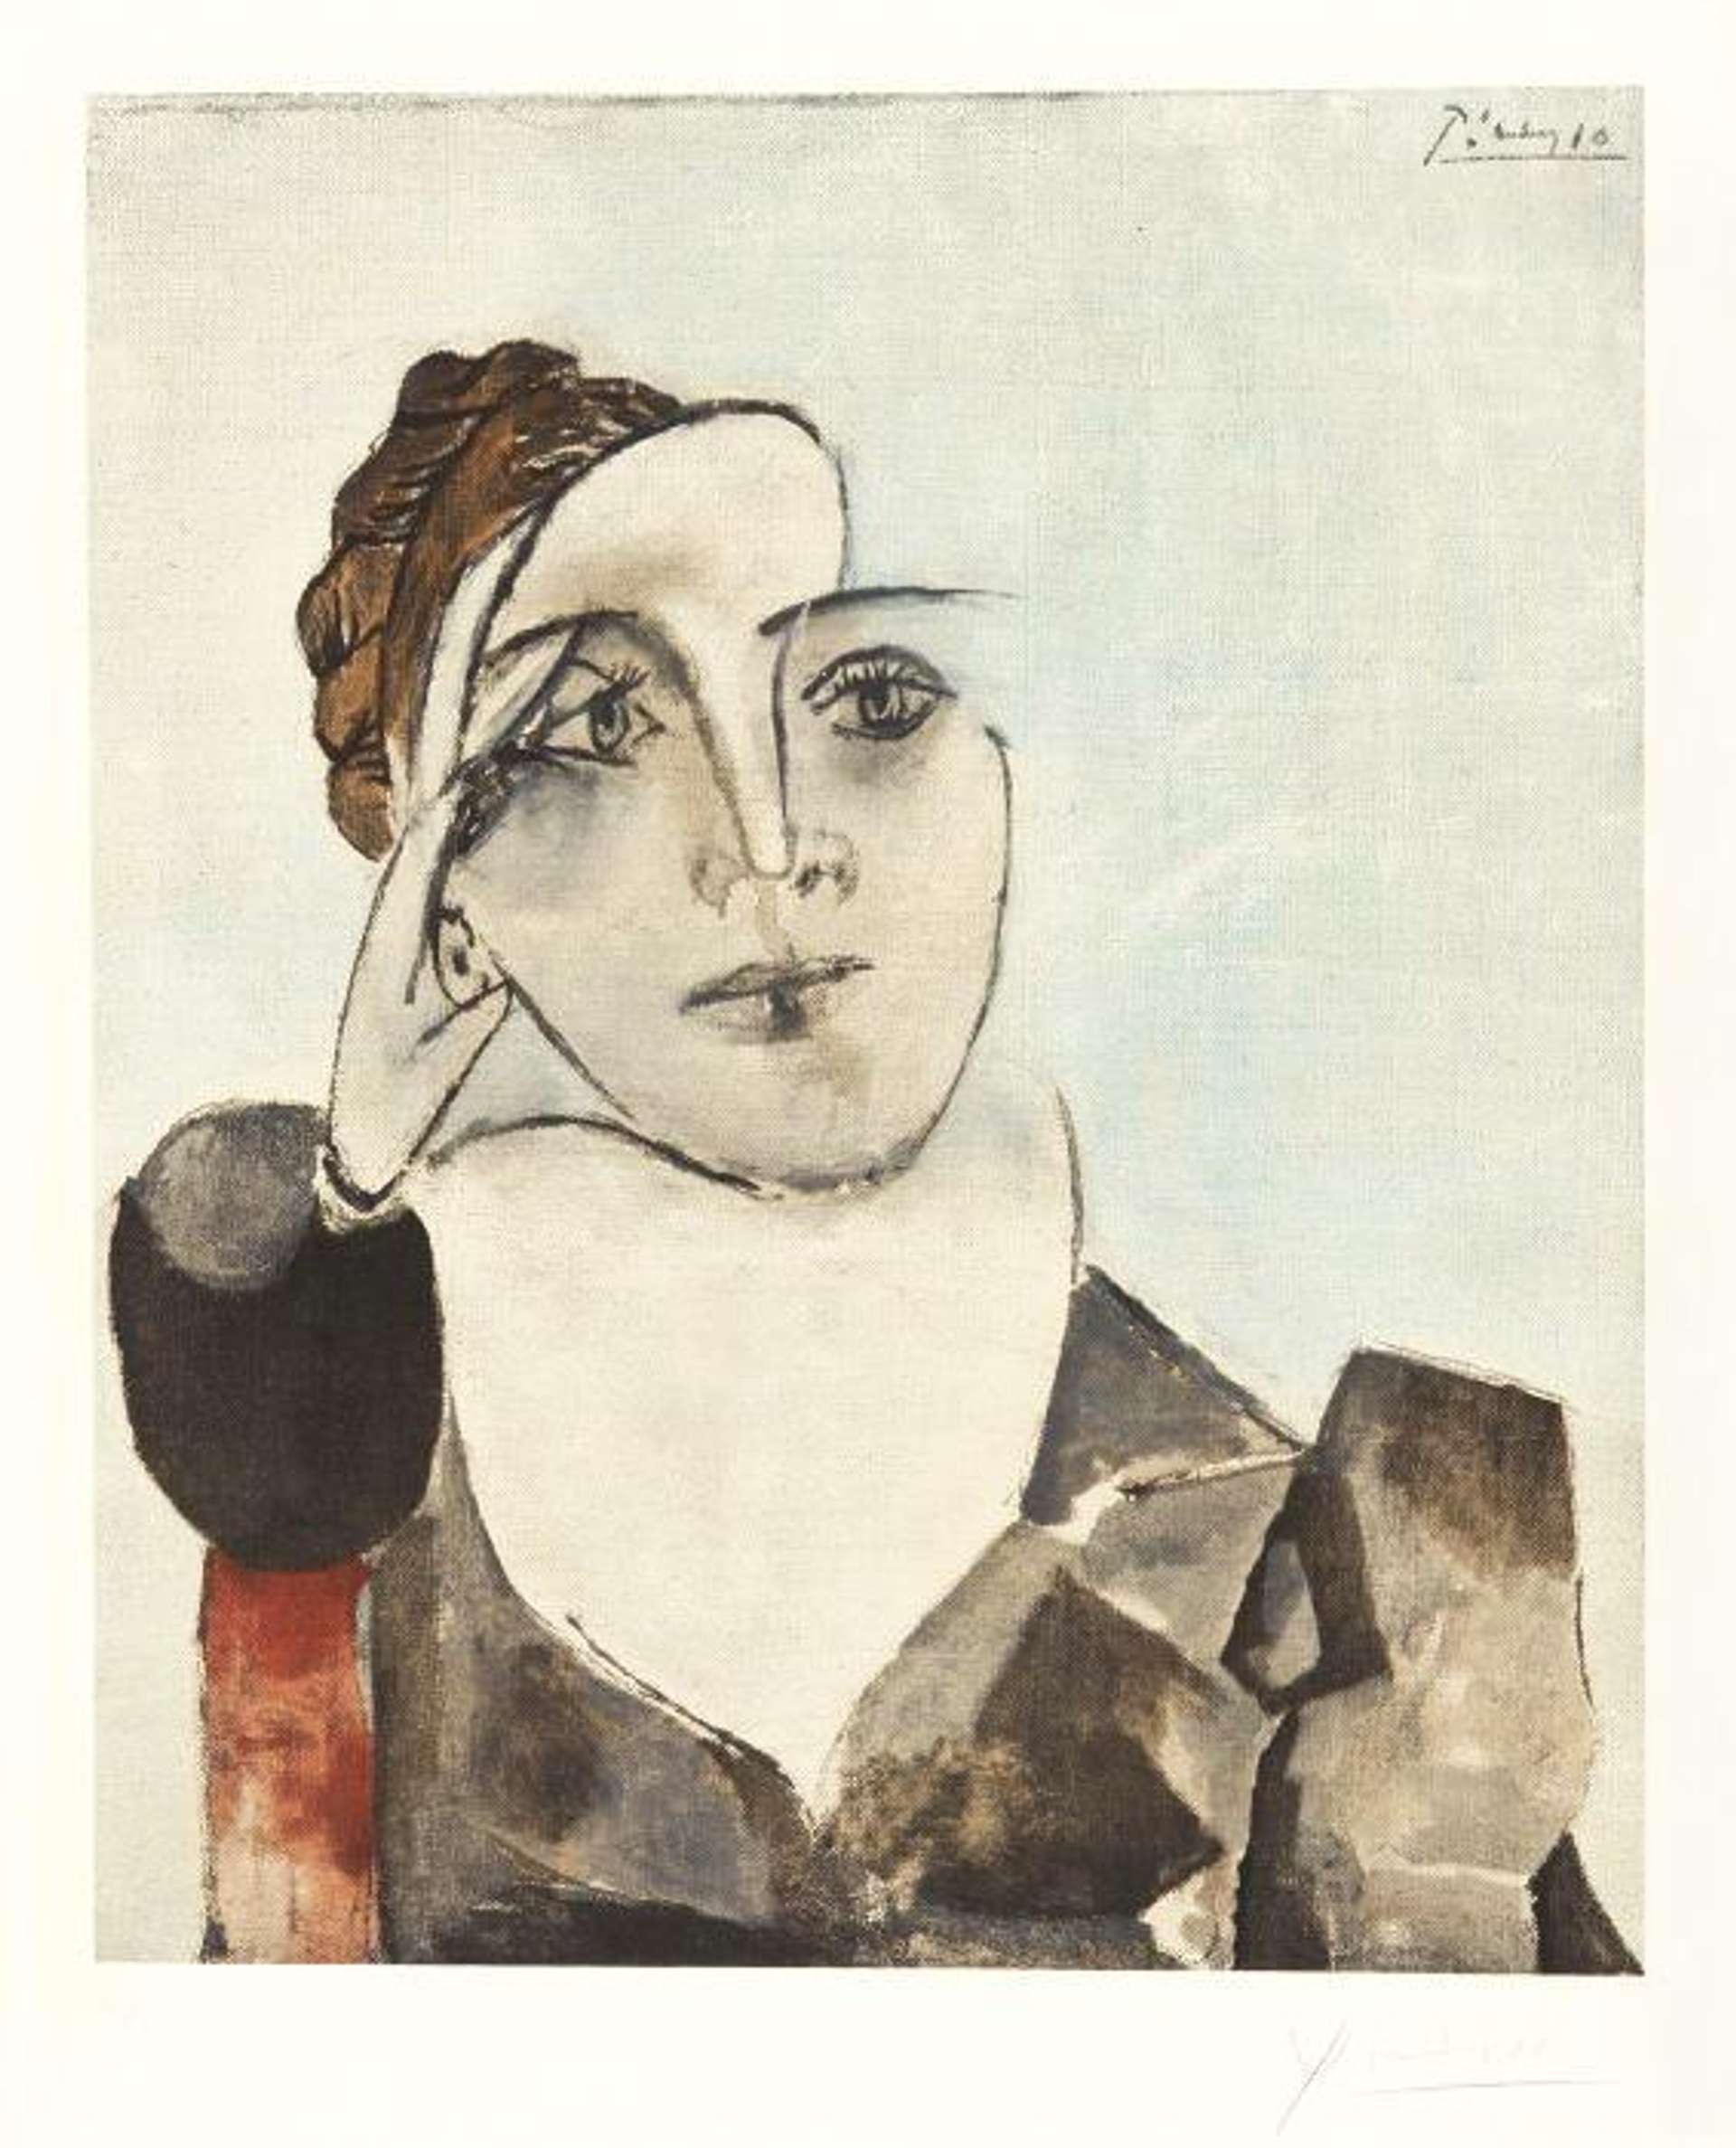 An image of a portrait of Dora Maar by Pablo Picasso. She is shown through a variety of geometrical shapes, in a Cubist-adjacent style.